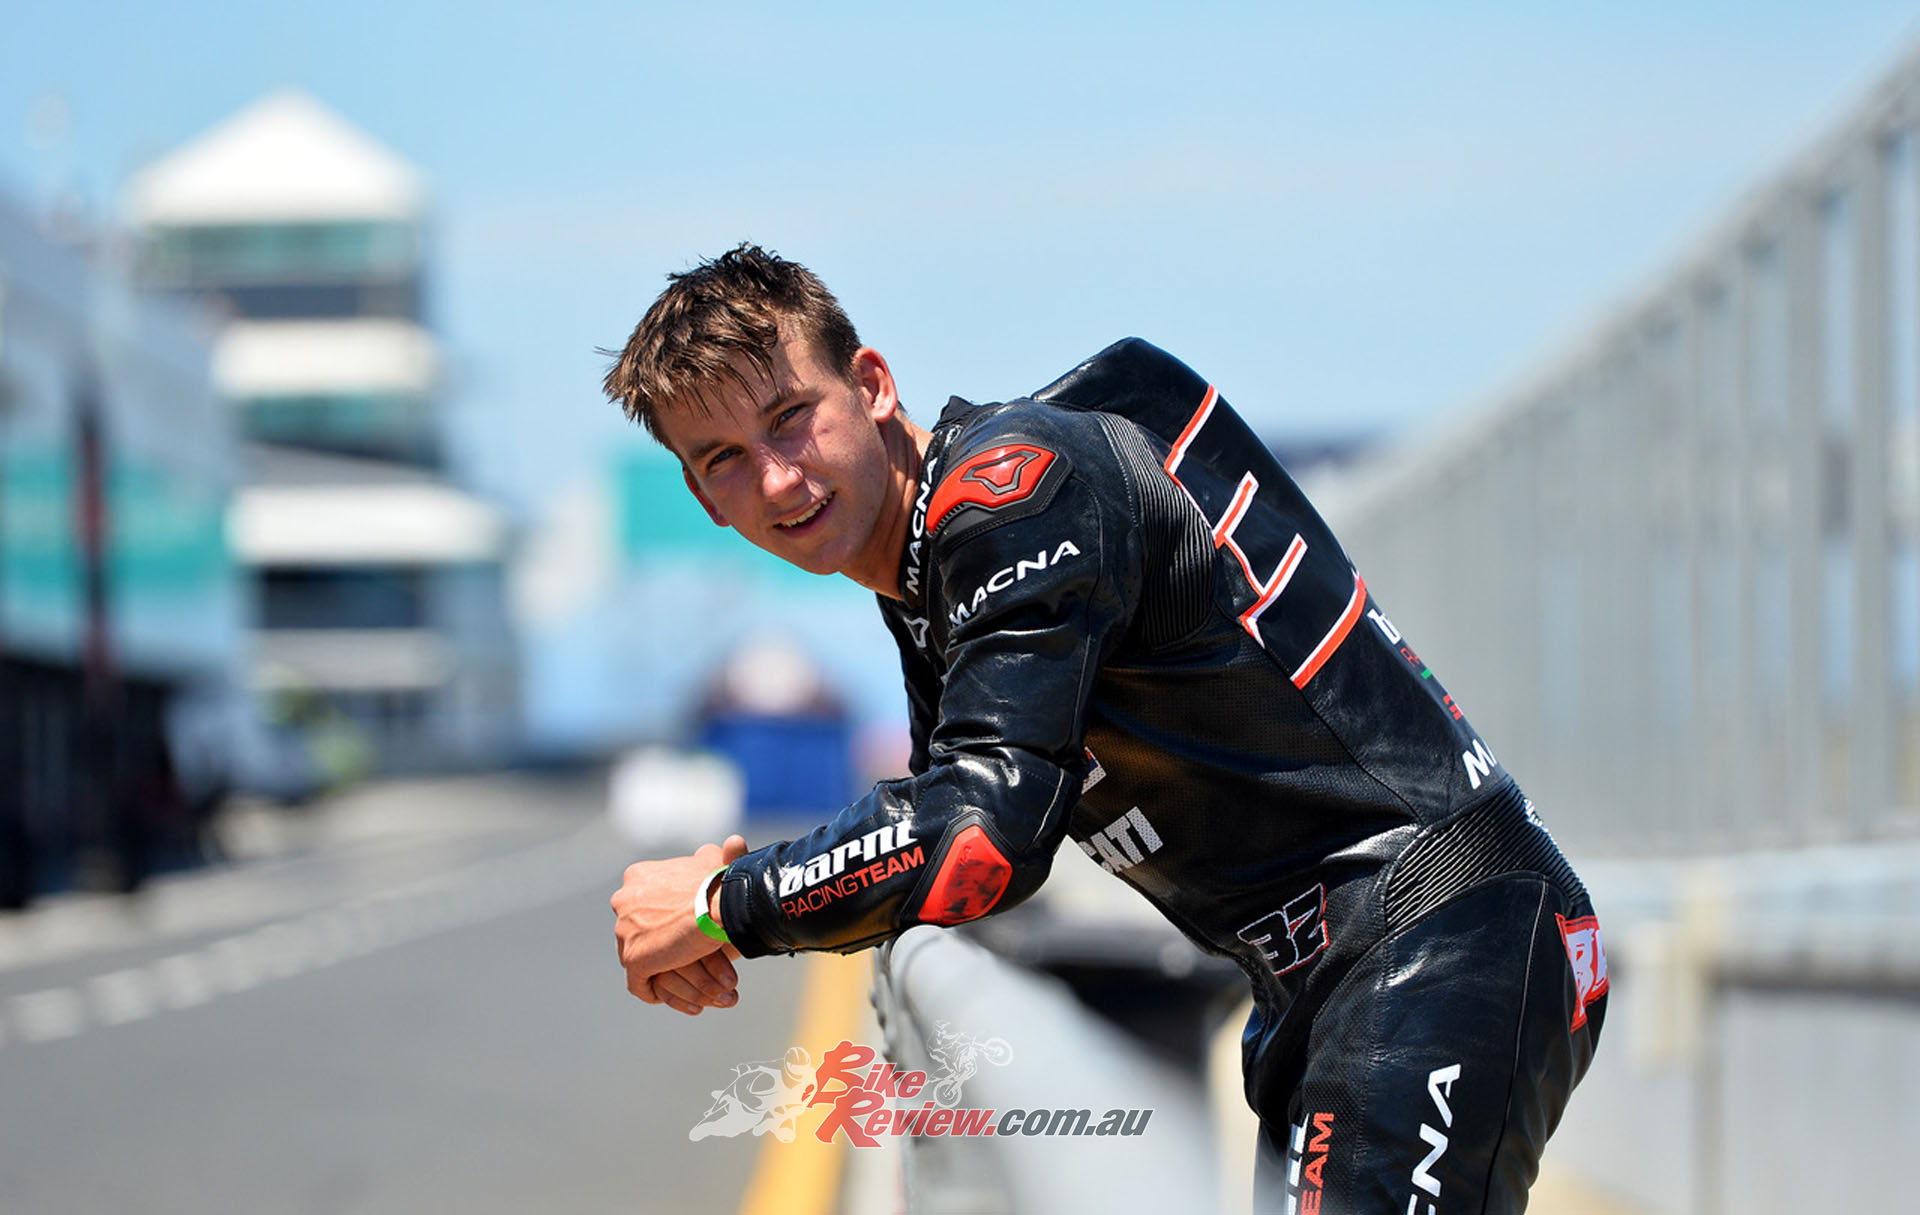 Australia’s Oli Bayliss will compete for Barni Spark Racing Team in 2022.